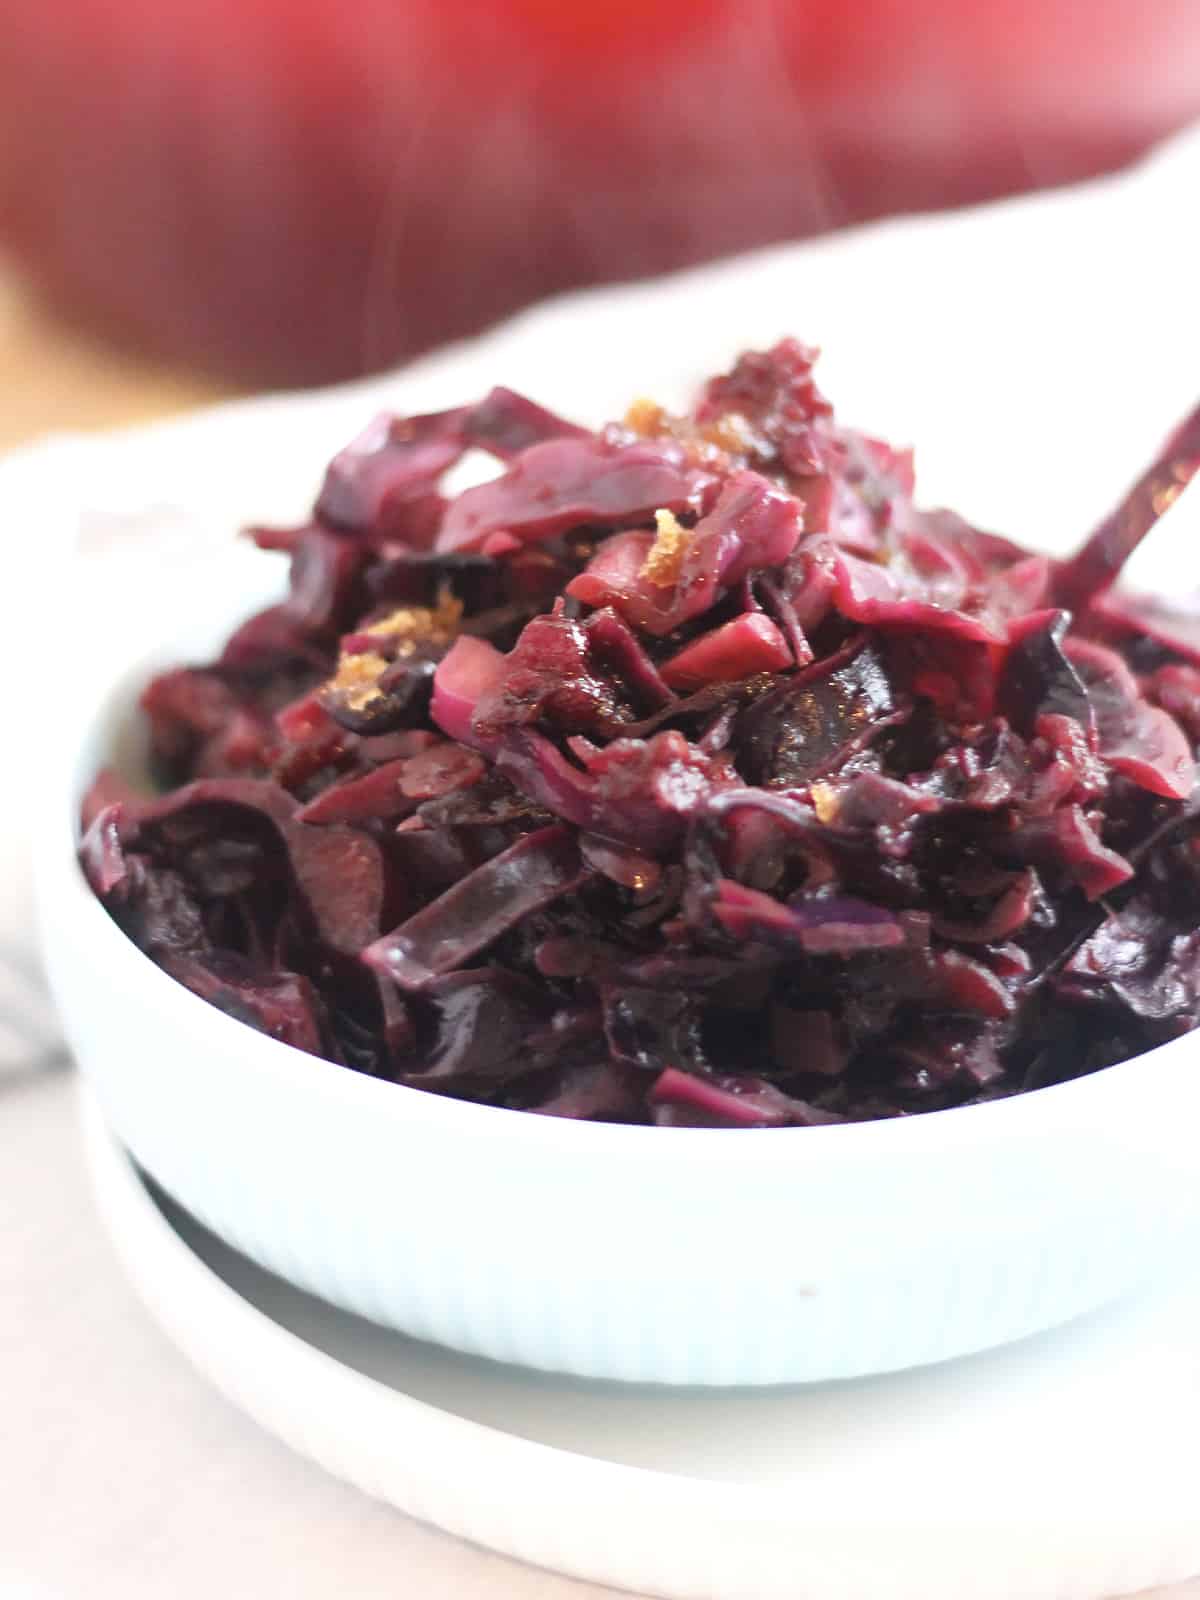 Braised Red Cabbage with Apples and Balsamic